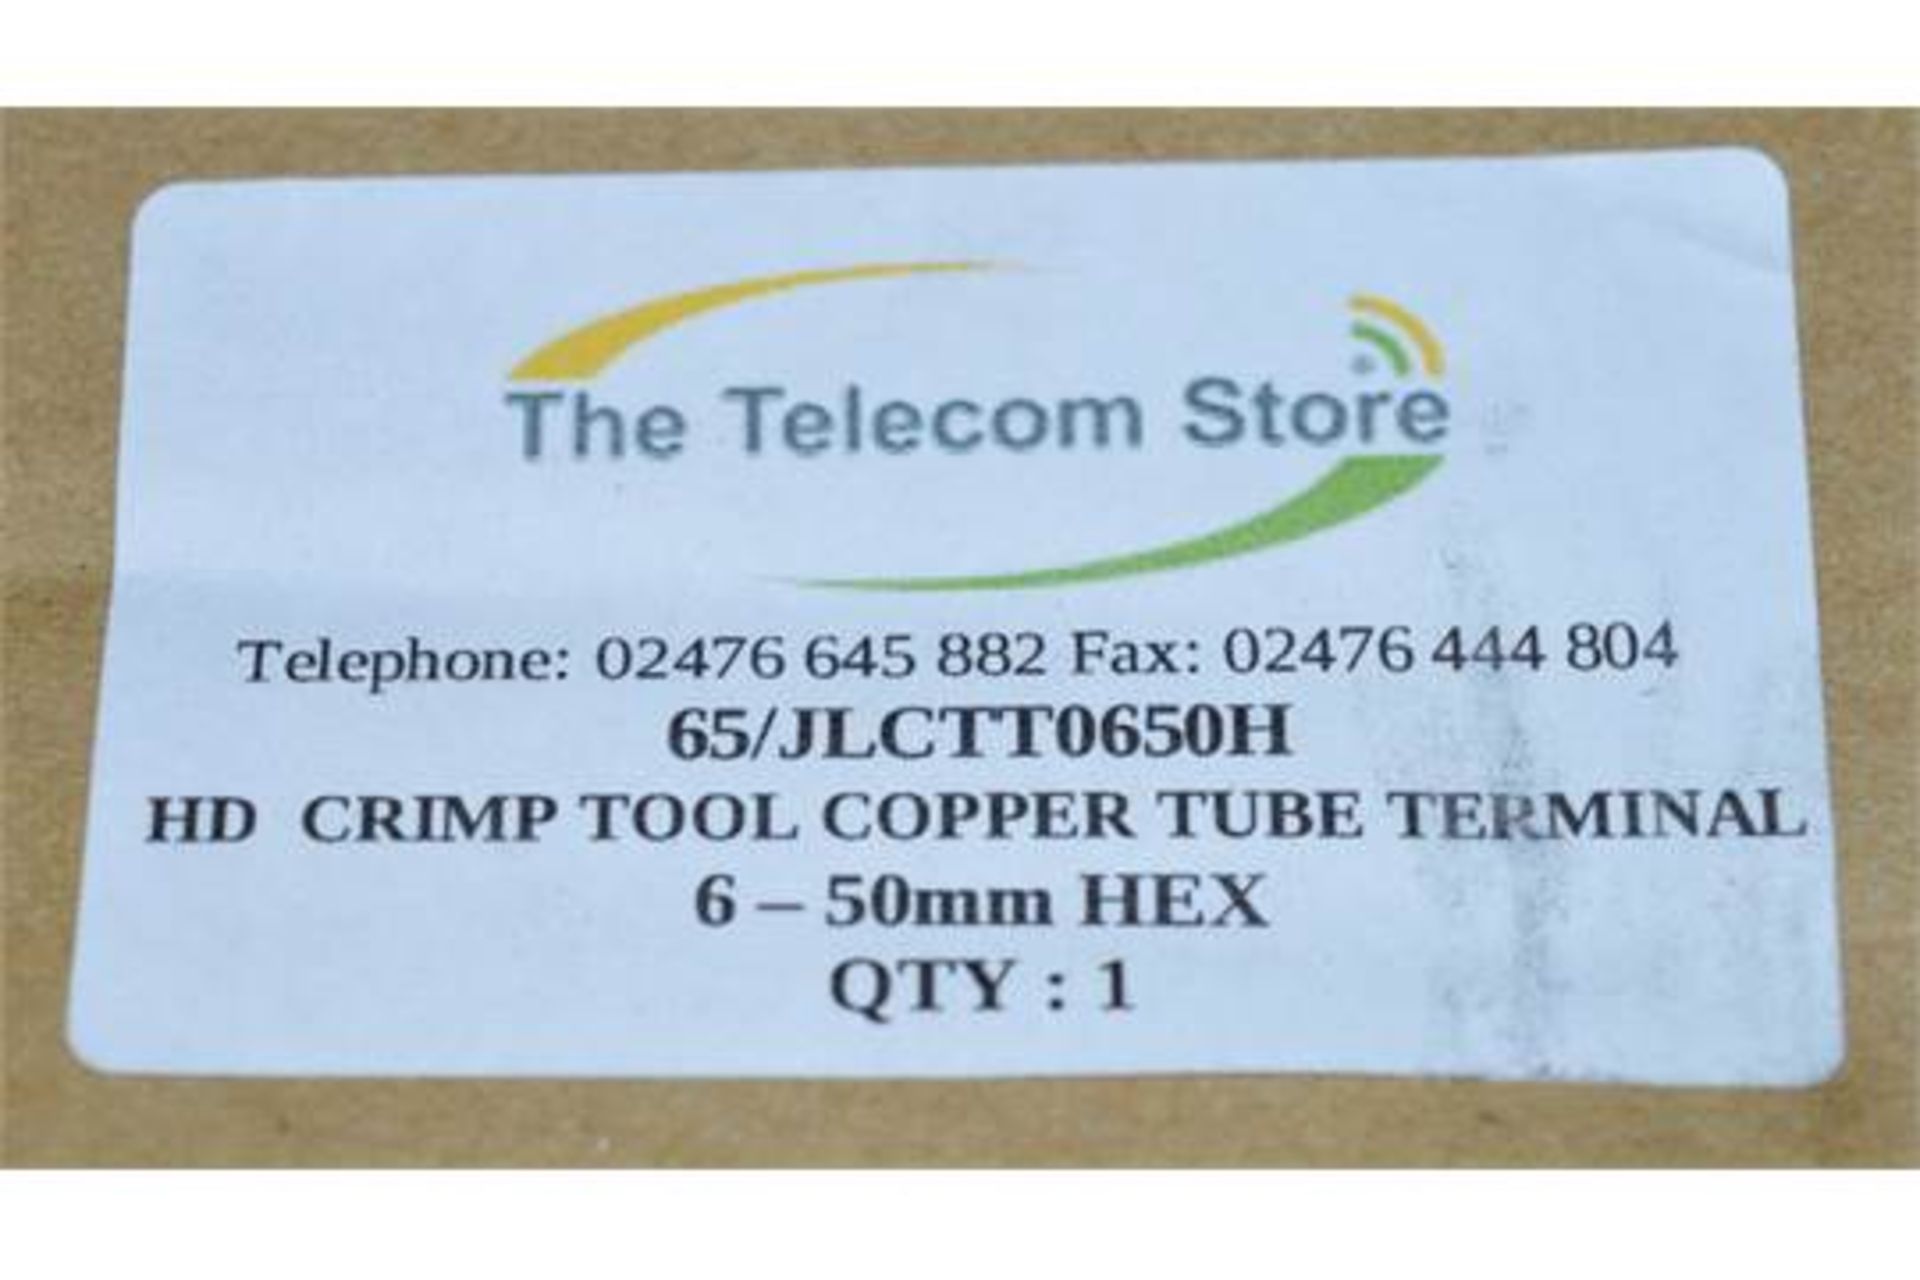 1 x HD Copper Tube Terminal Crimp Tool With Adjustable Hex - 38cm Length - XXX Branded - New and - Image 3 of 3